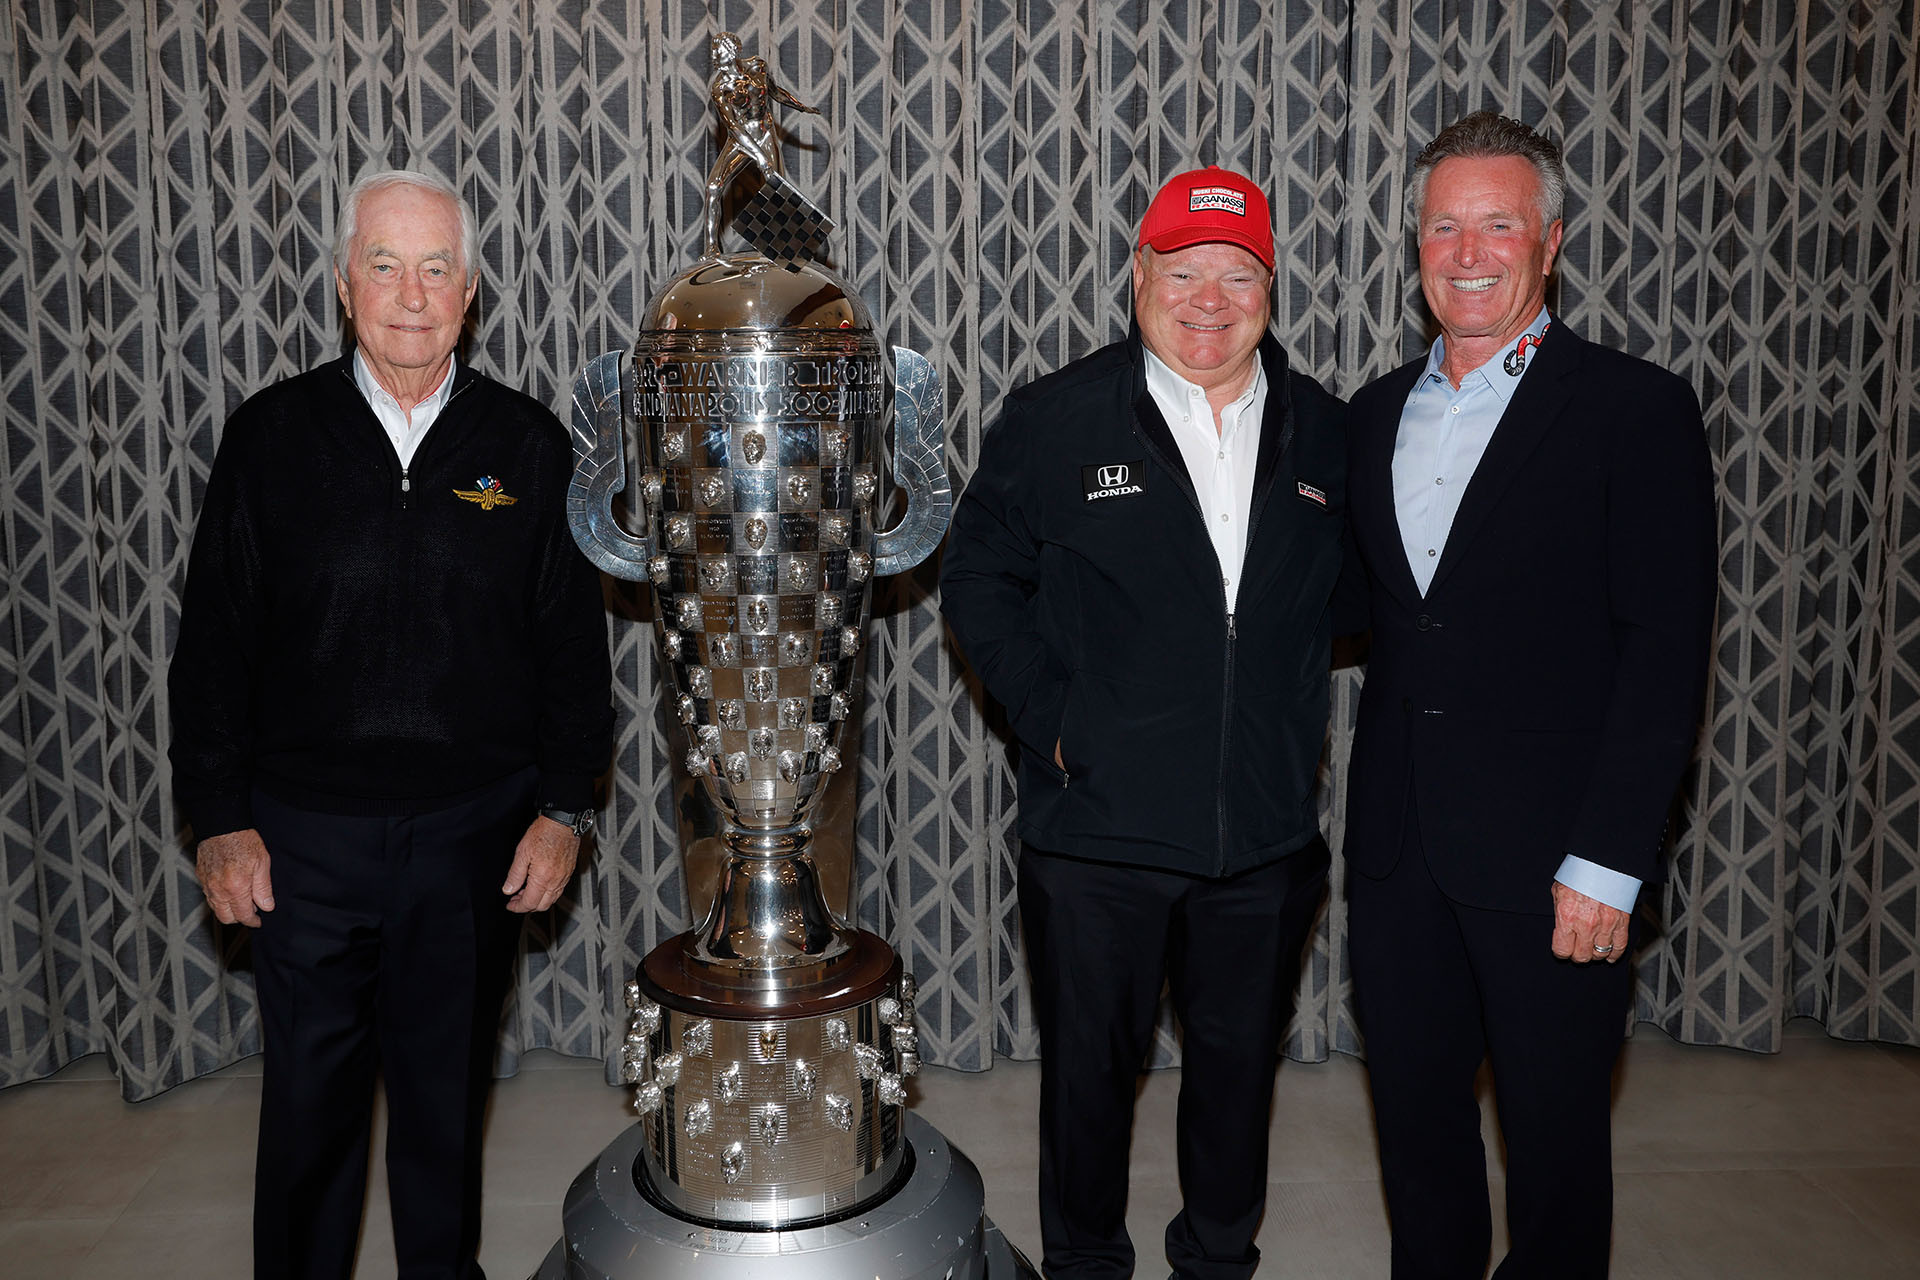 Three people stand in line next to large silver trophy while smiling